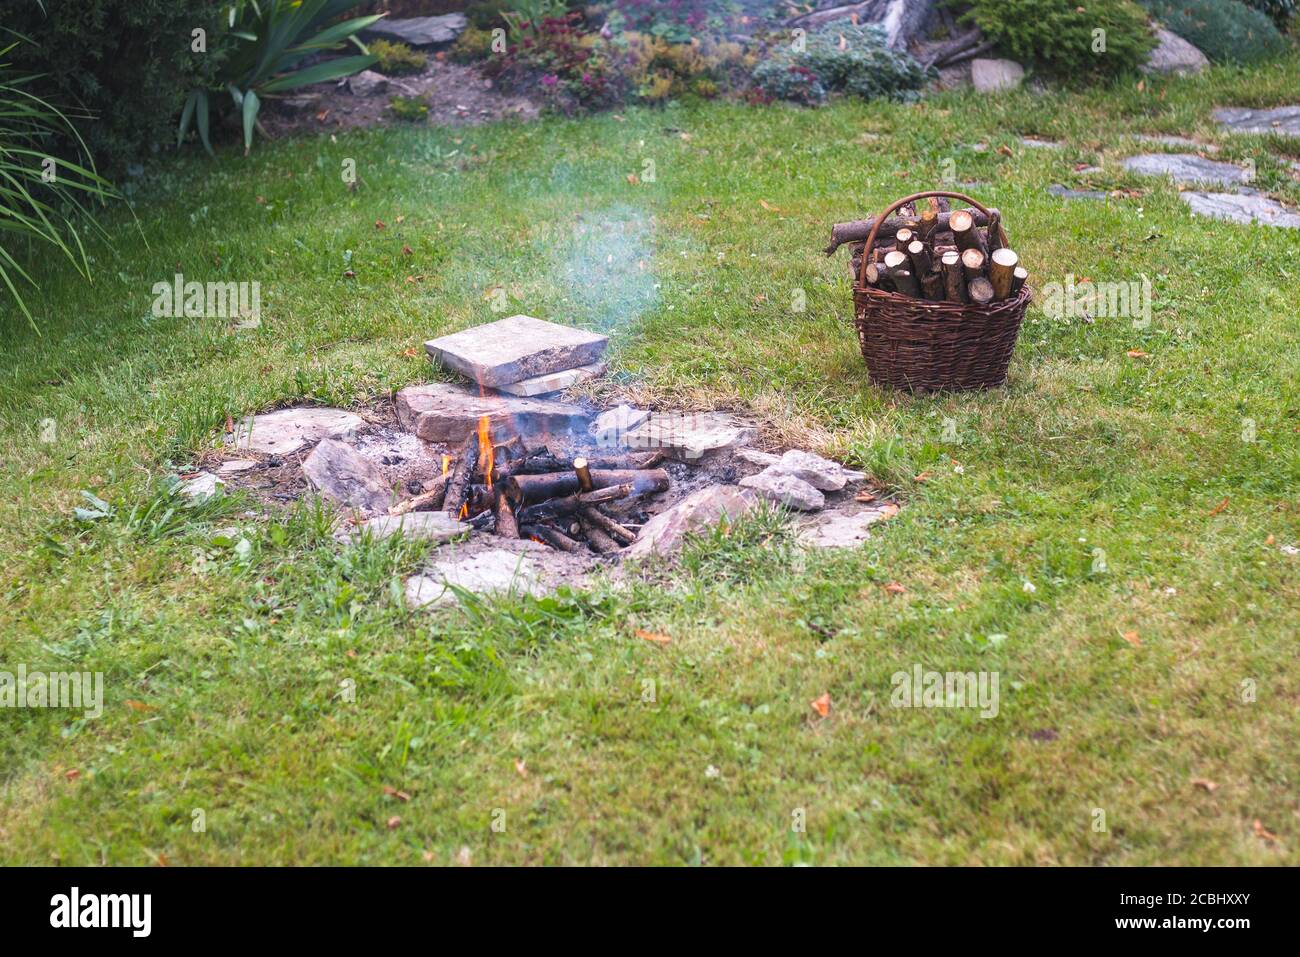 camp fire in the garden, next to a basket with firewood Stock Photo